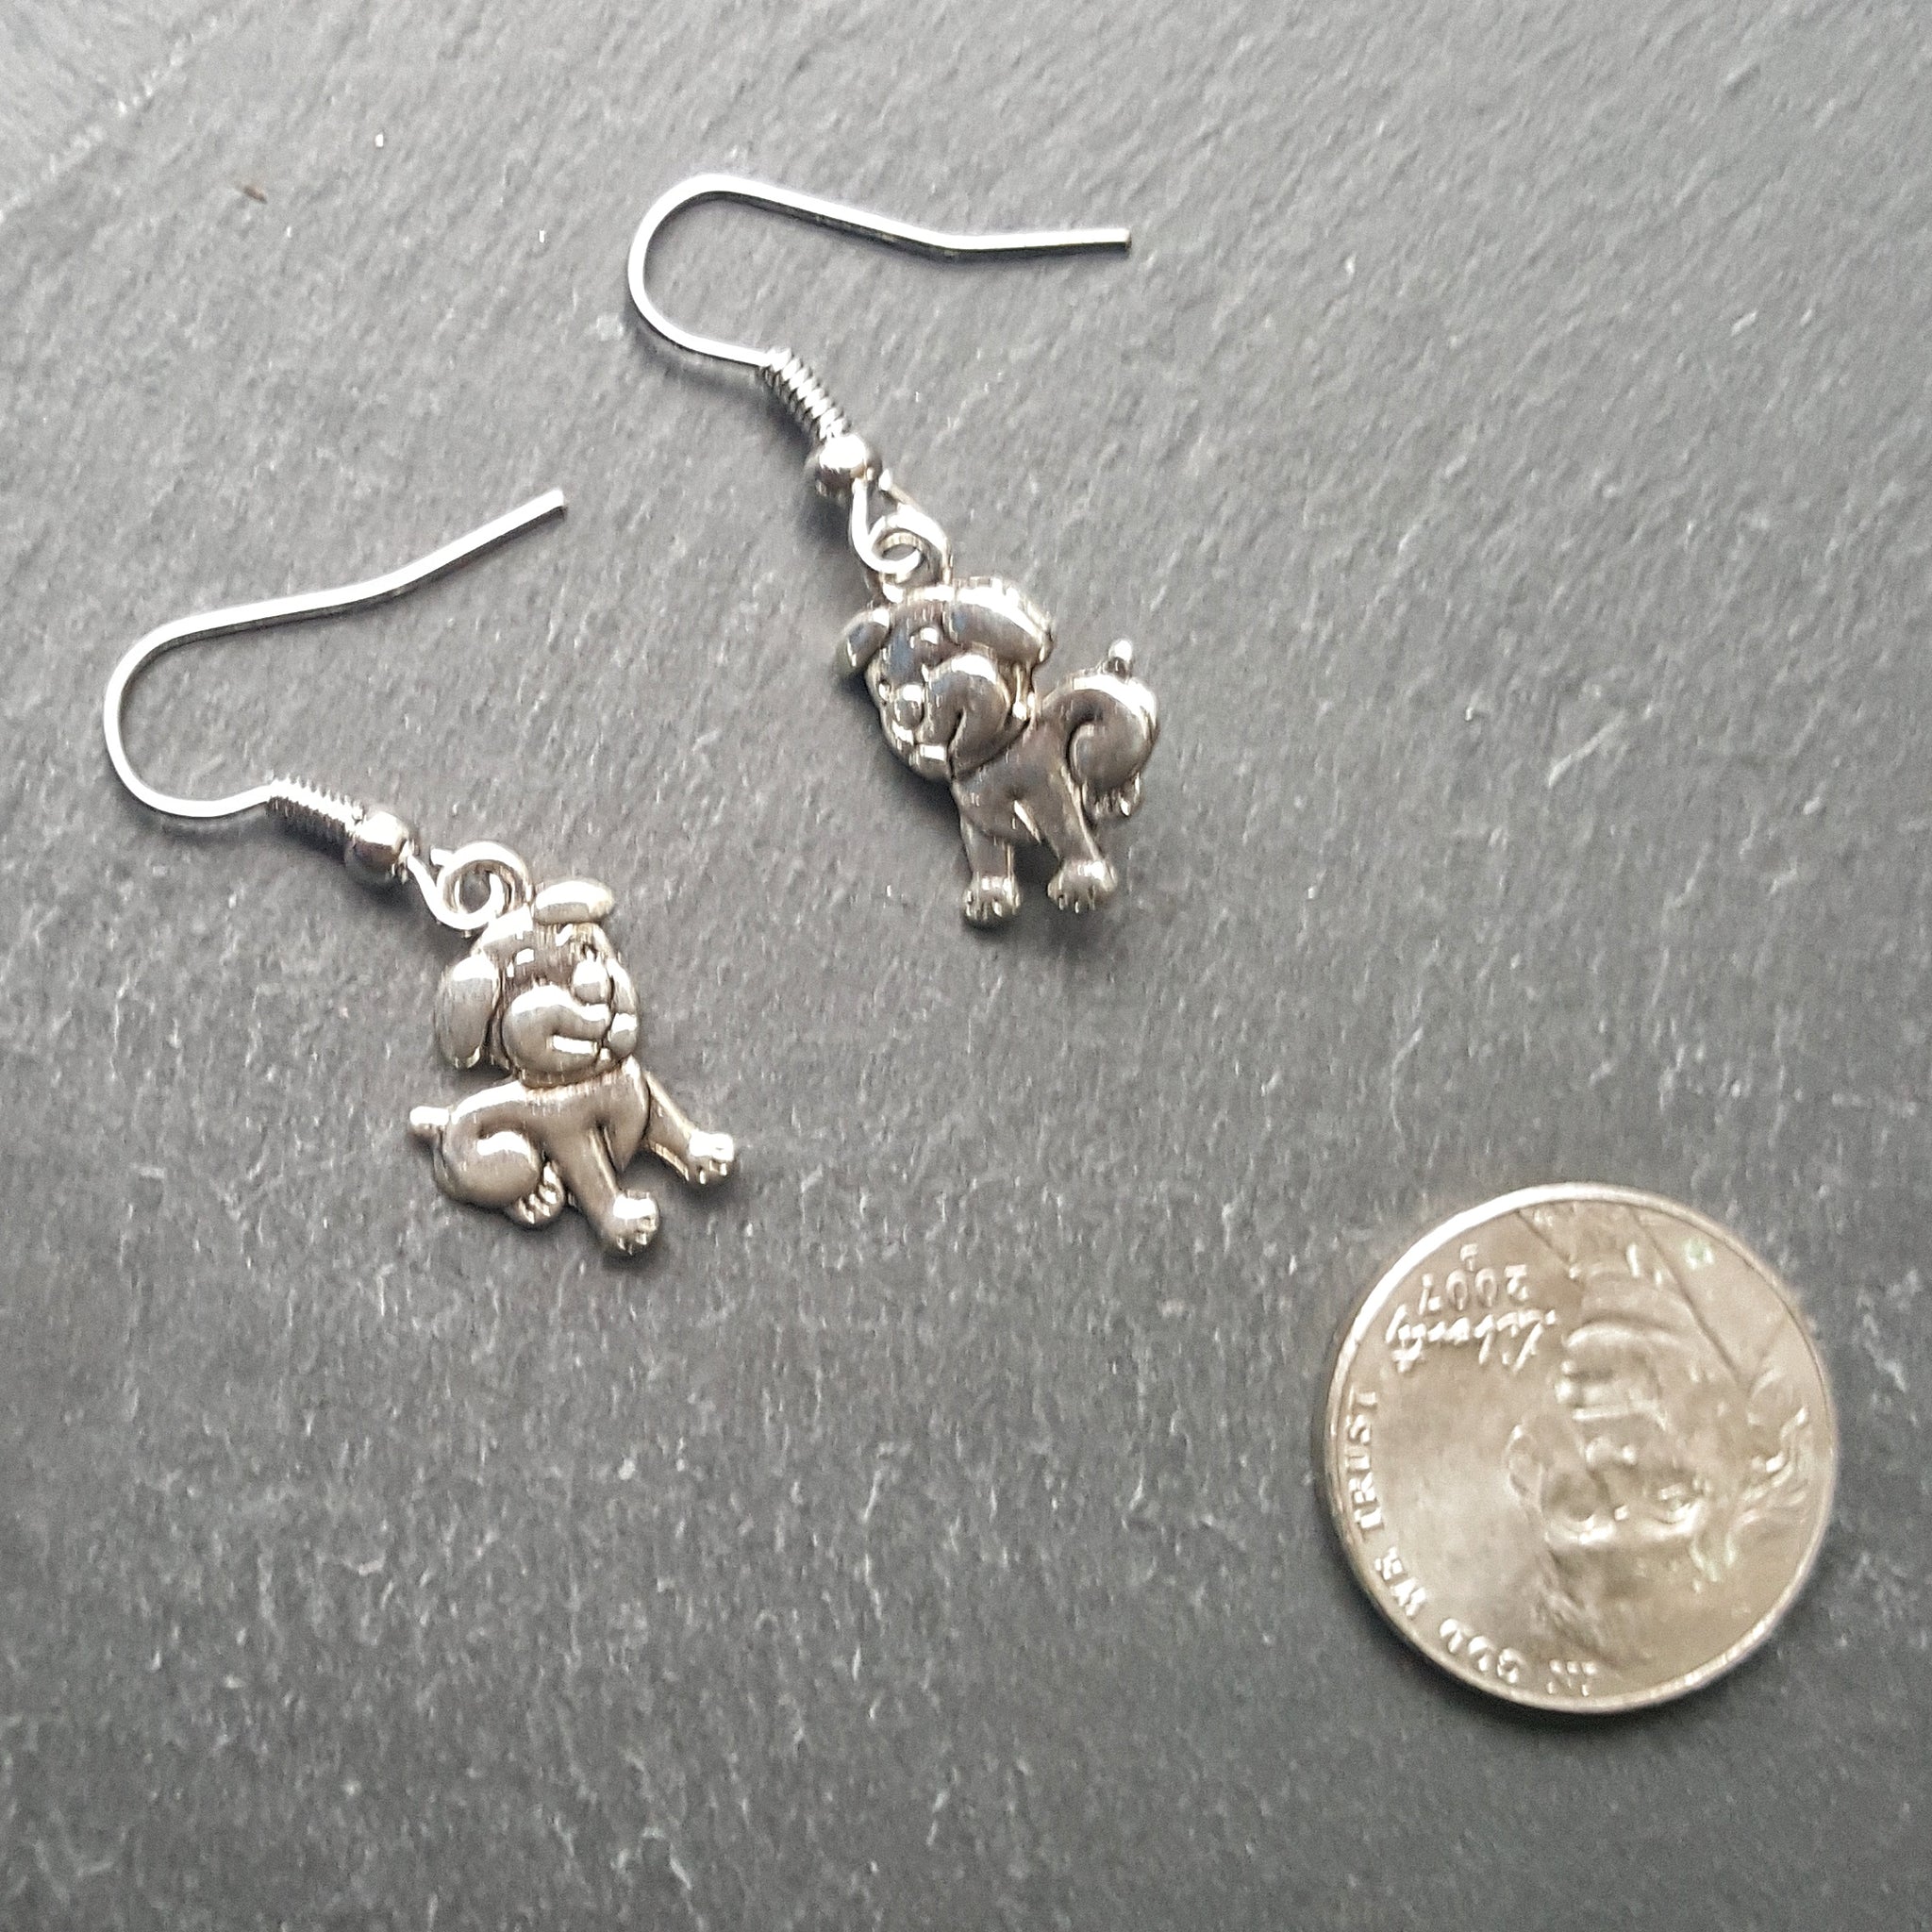 Silver Puppy Dog Earrings Dog Lover Gift - DRAVYNMOOR